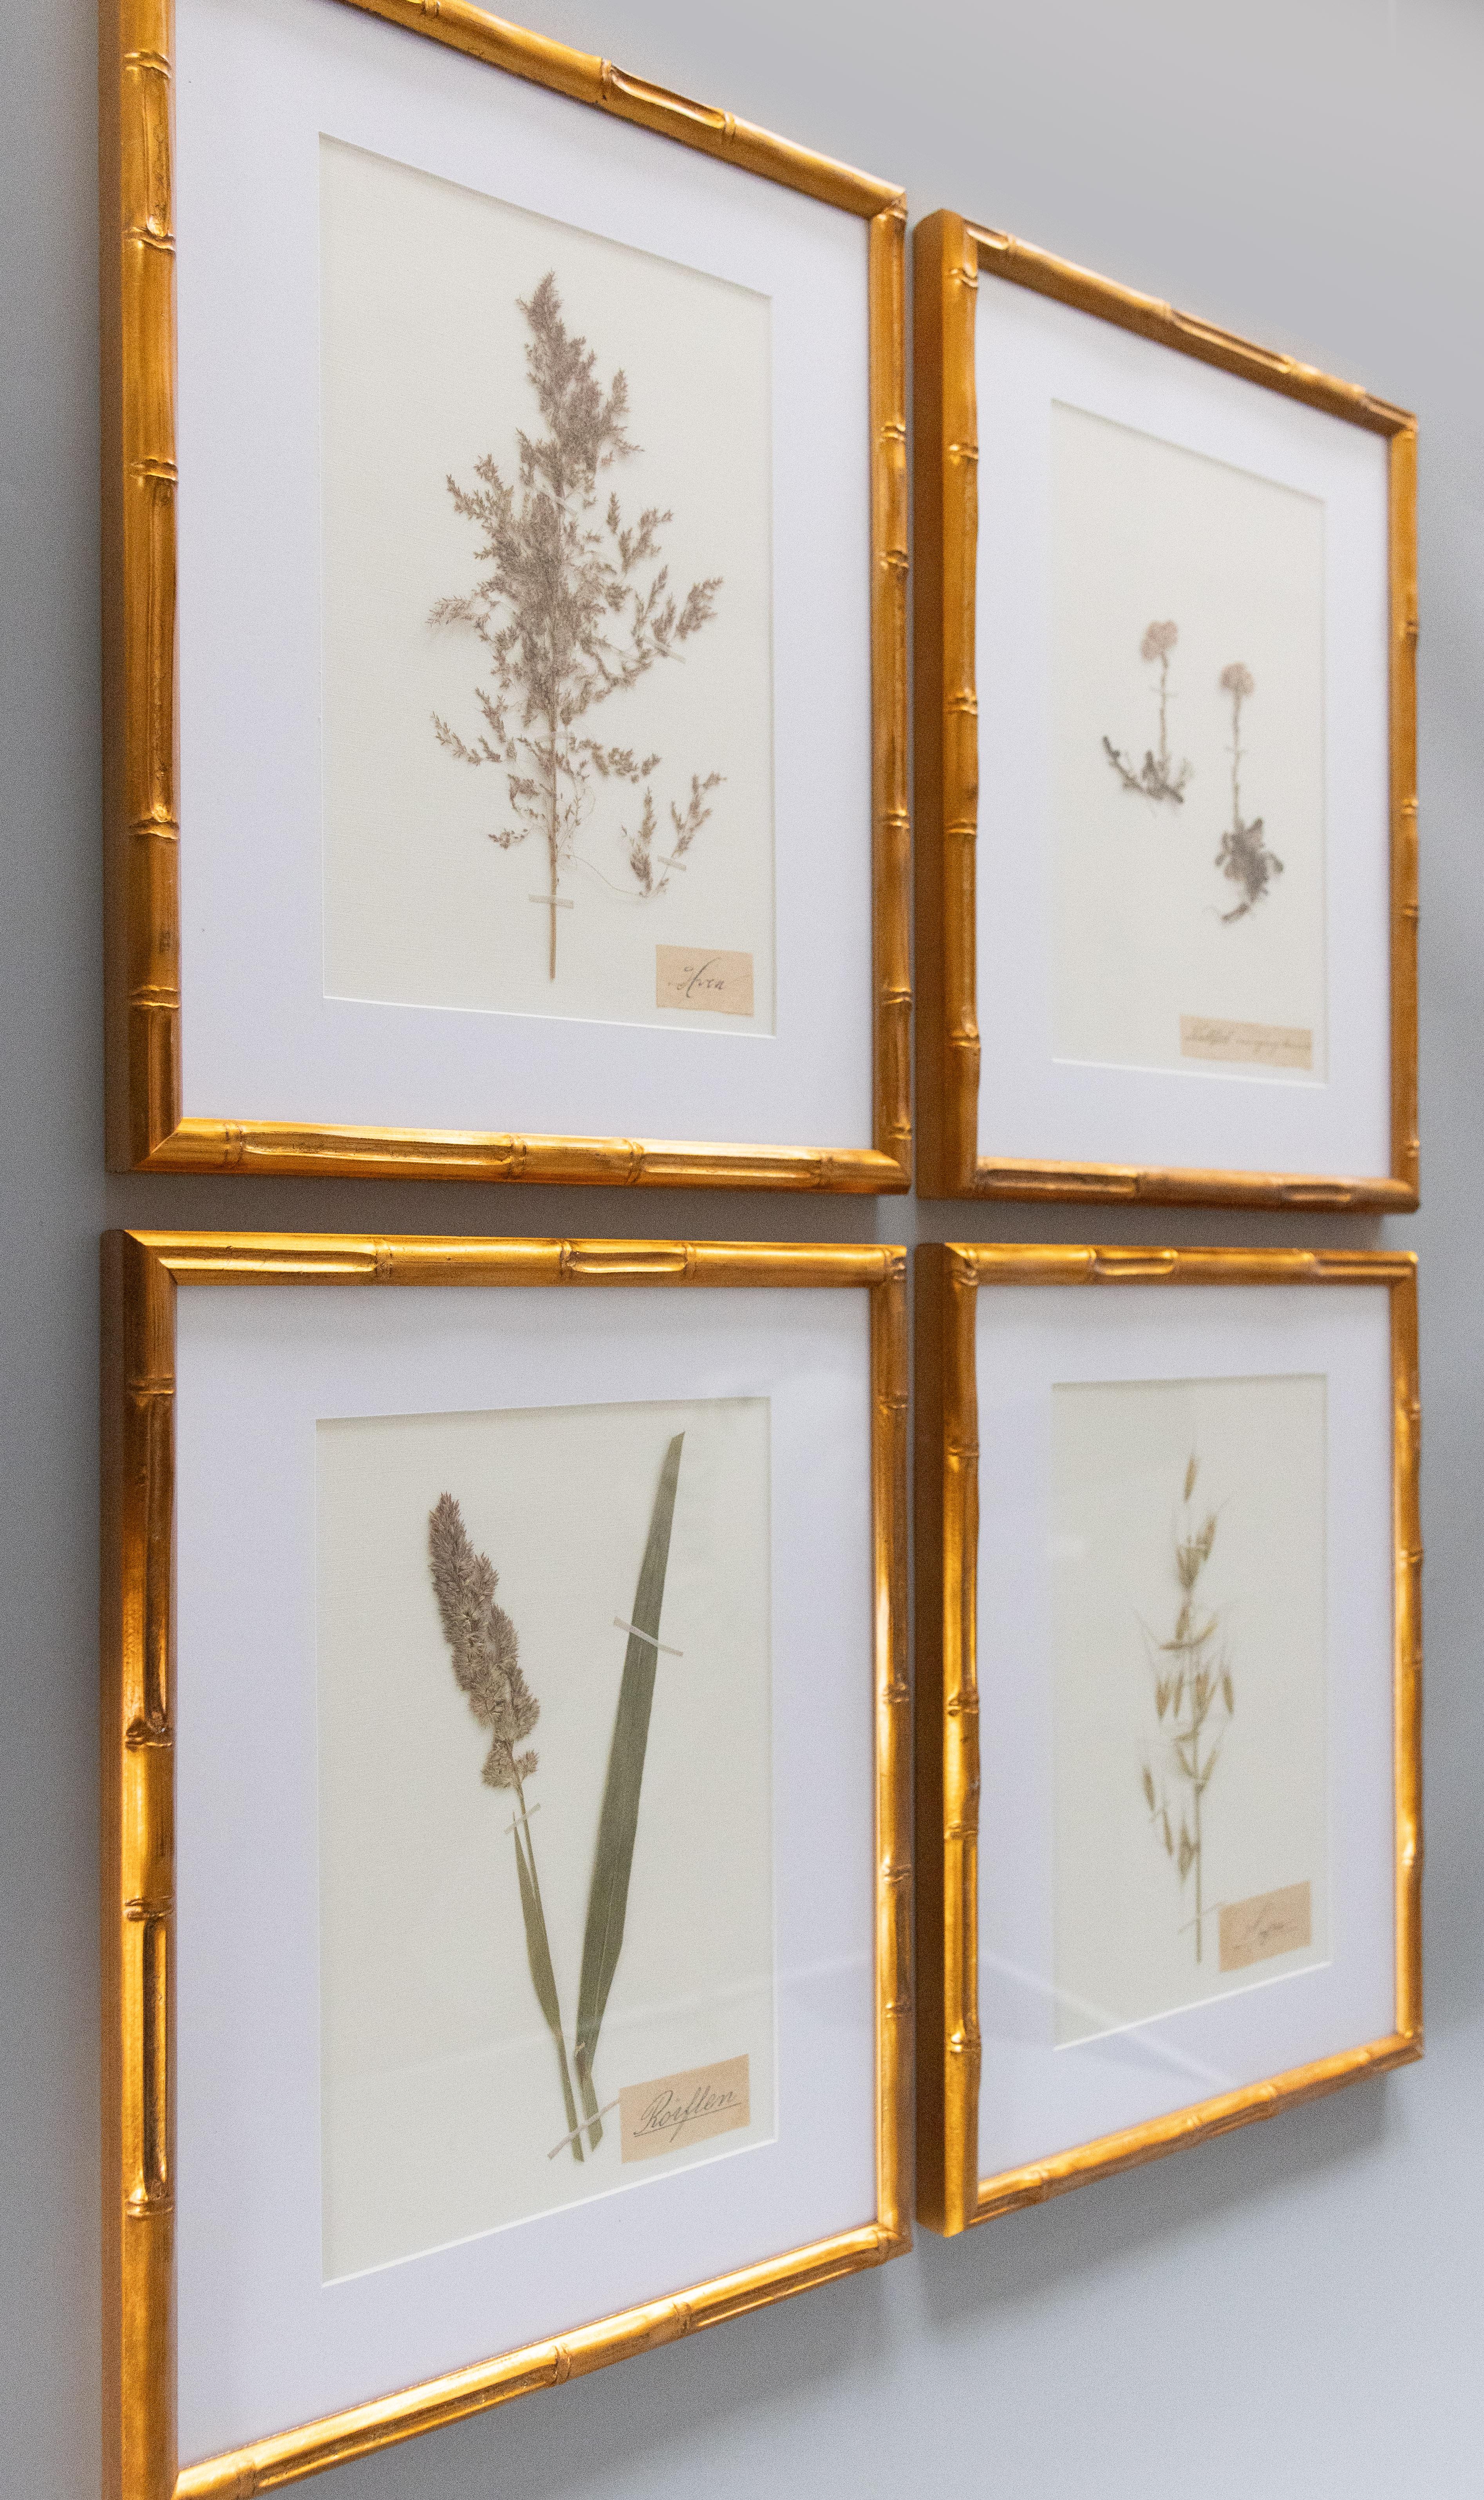 Beautiful custom framed antique herbarium floral specimens, collected circa 1890. Handwritten names in lovely Swedish script. Specimens include cat's foot, wild oat, and others. Presented in faux bamboo gold frames, custom matted.